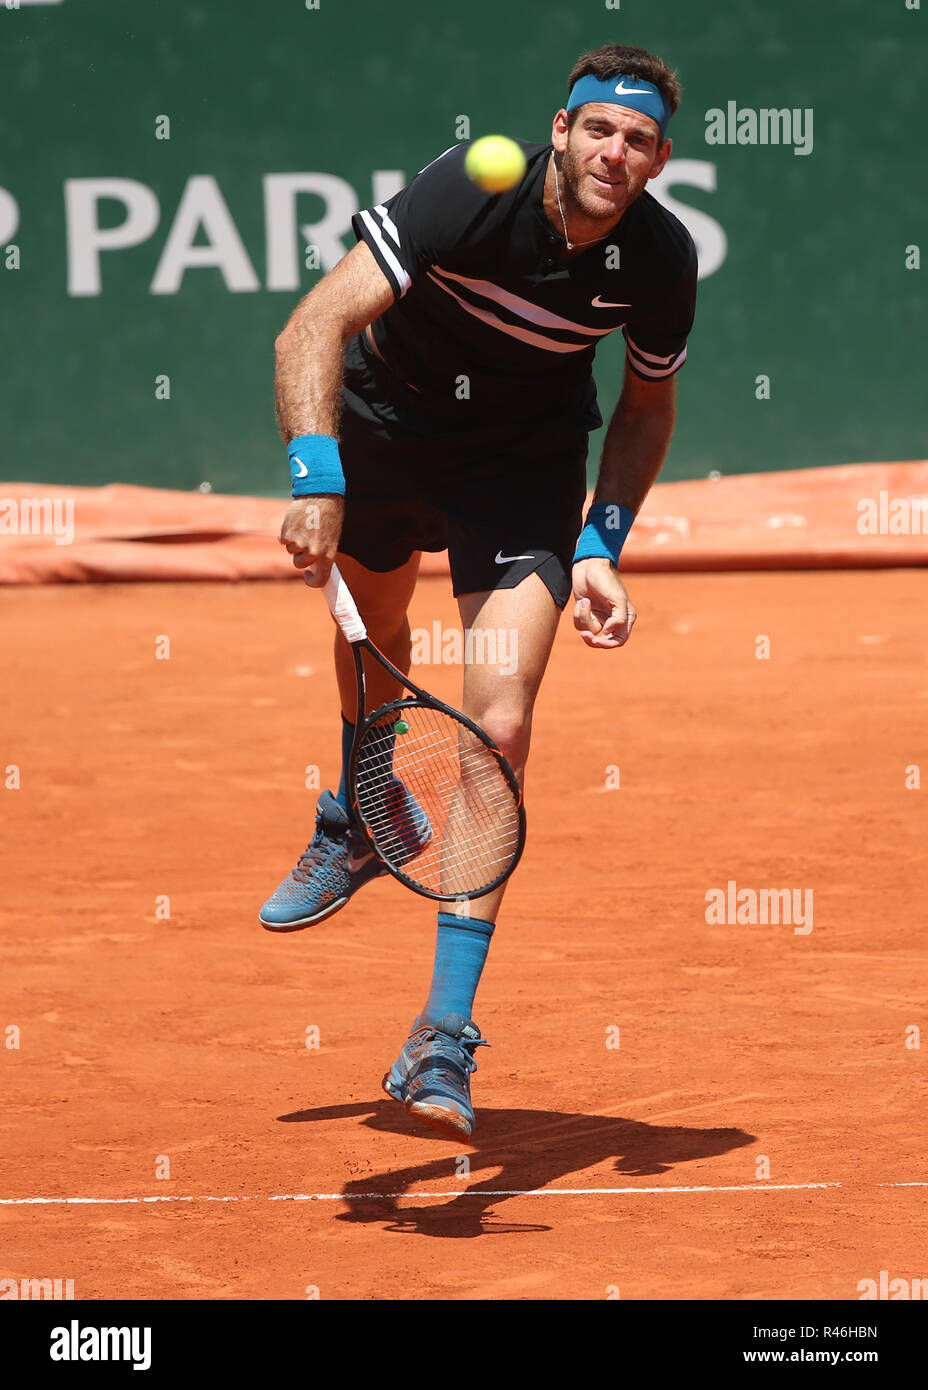 Argentinian tennis player Juan Martin Del Potro playing service shot at the  French Open 2018,Paris, France Stock Photo - Alamy